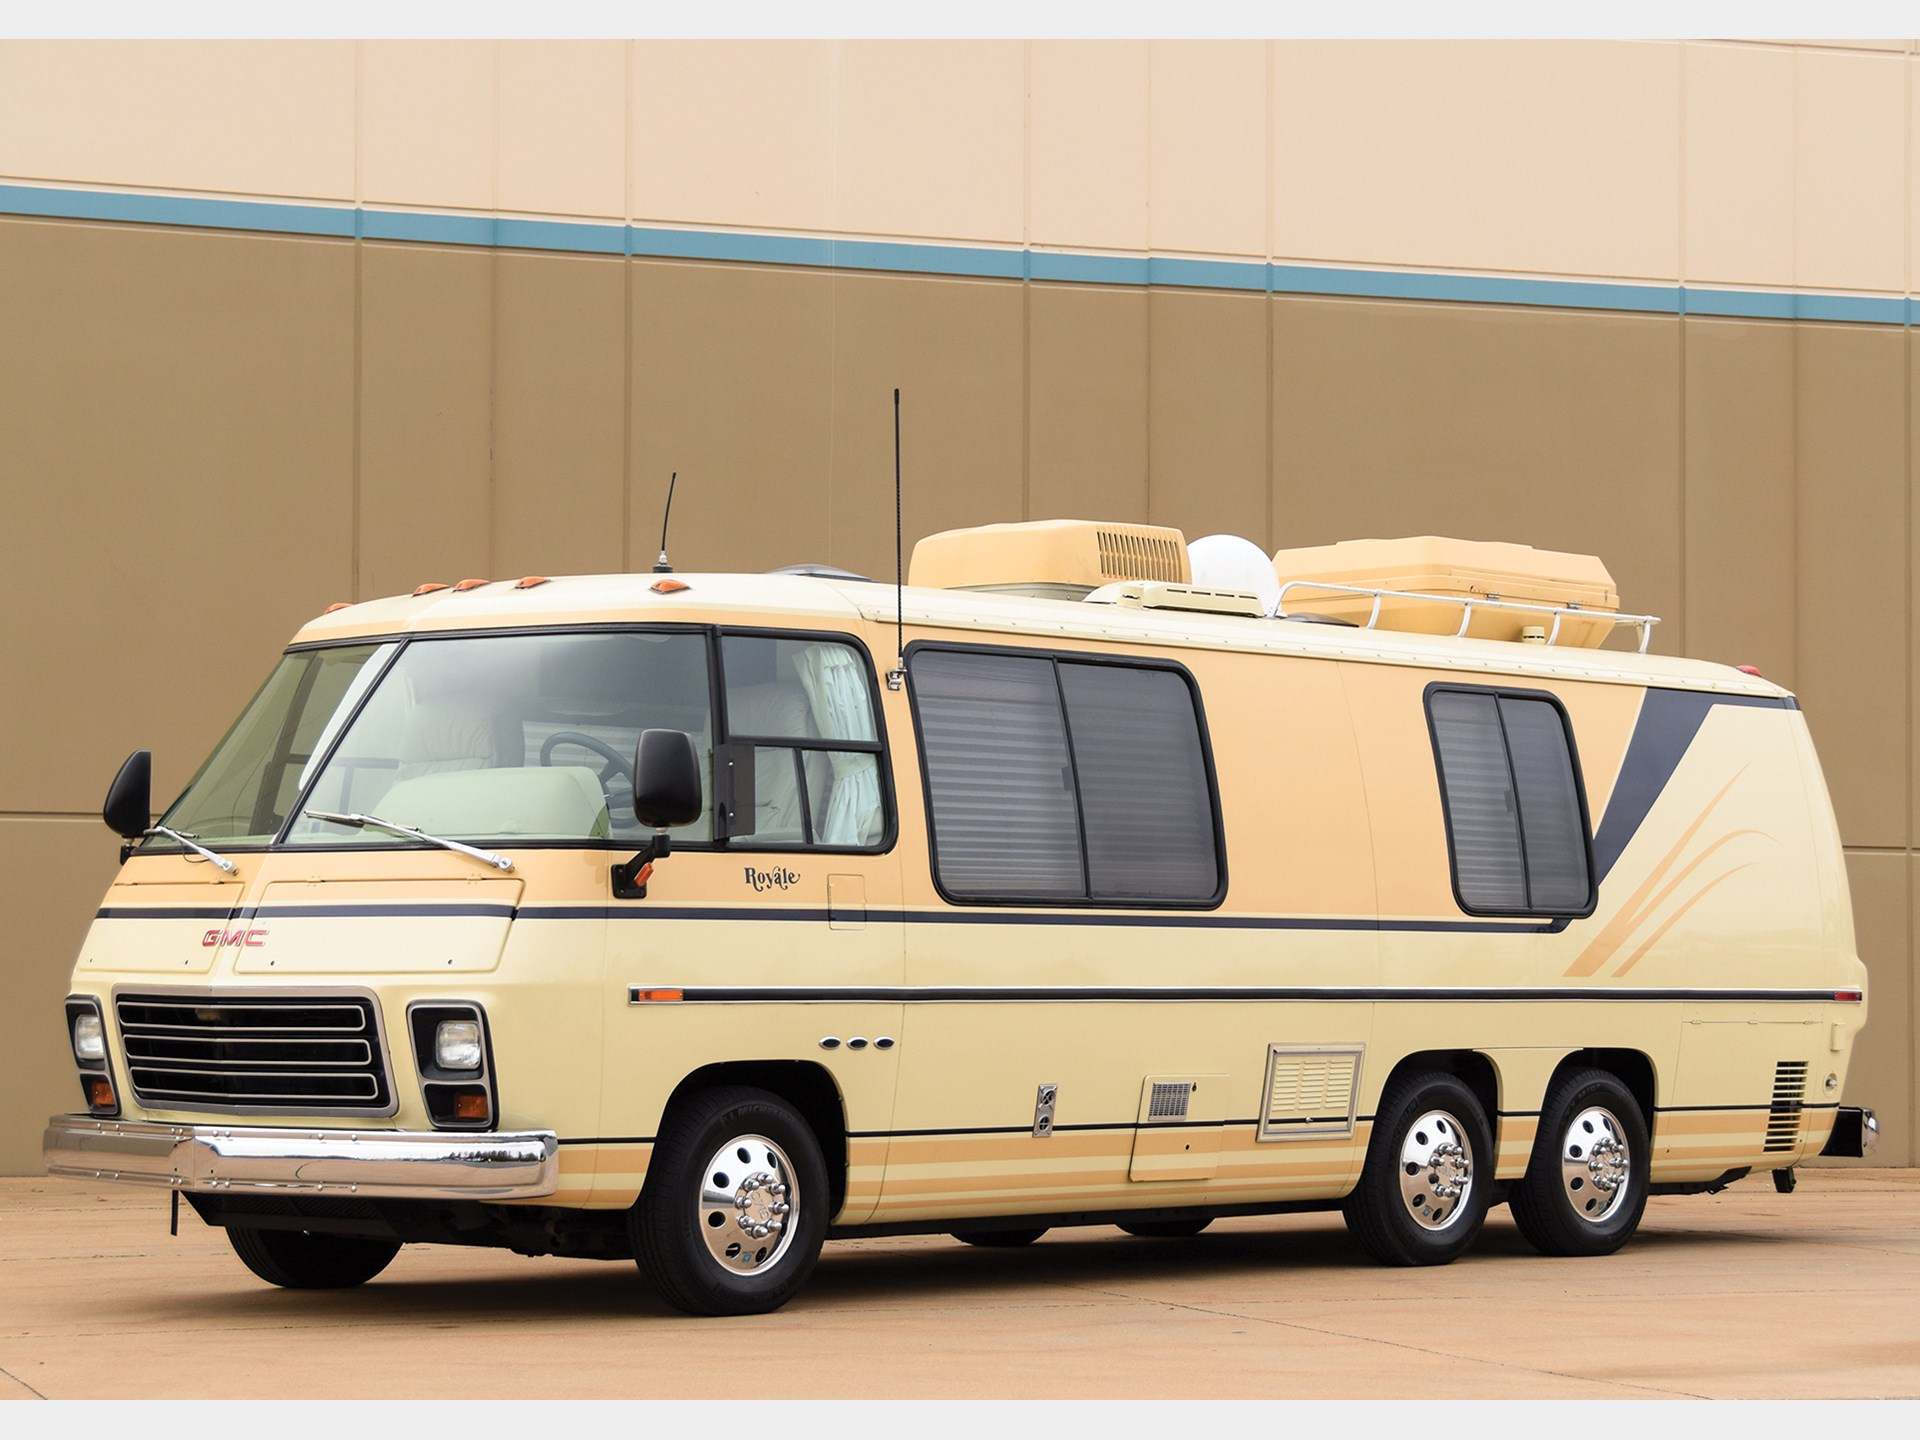 Gmc Royale Motorhome | Hot Sex Picture